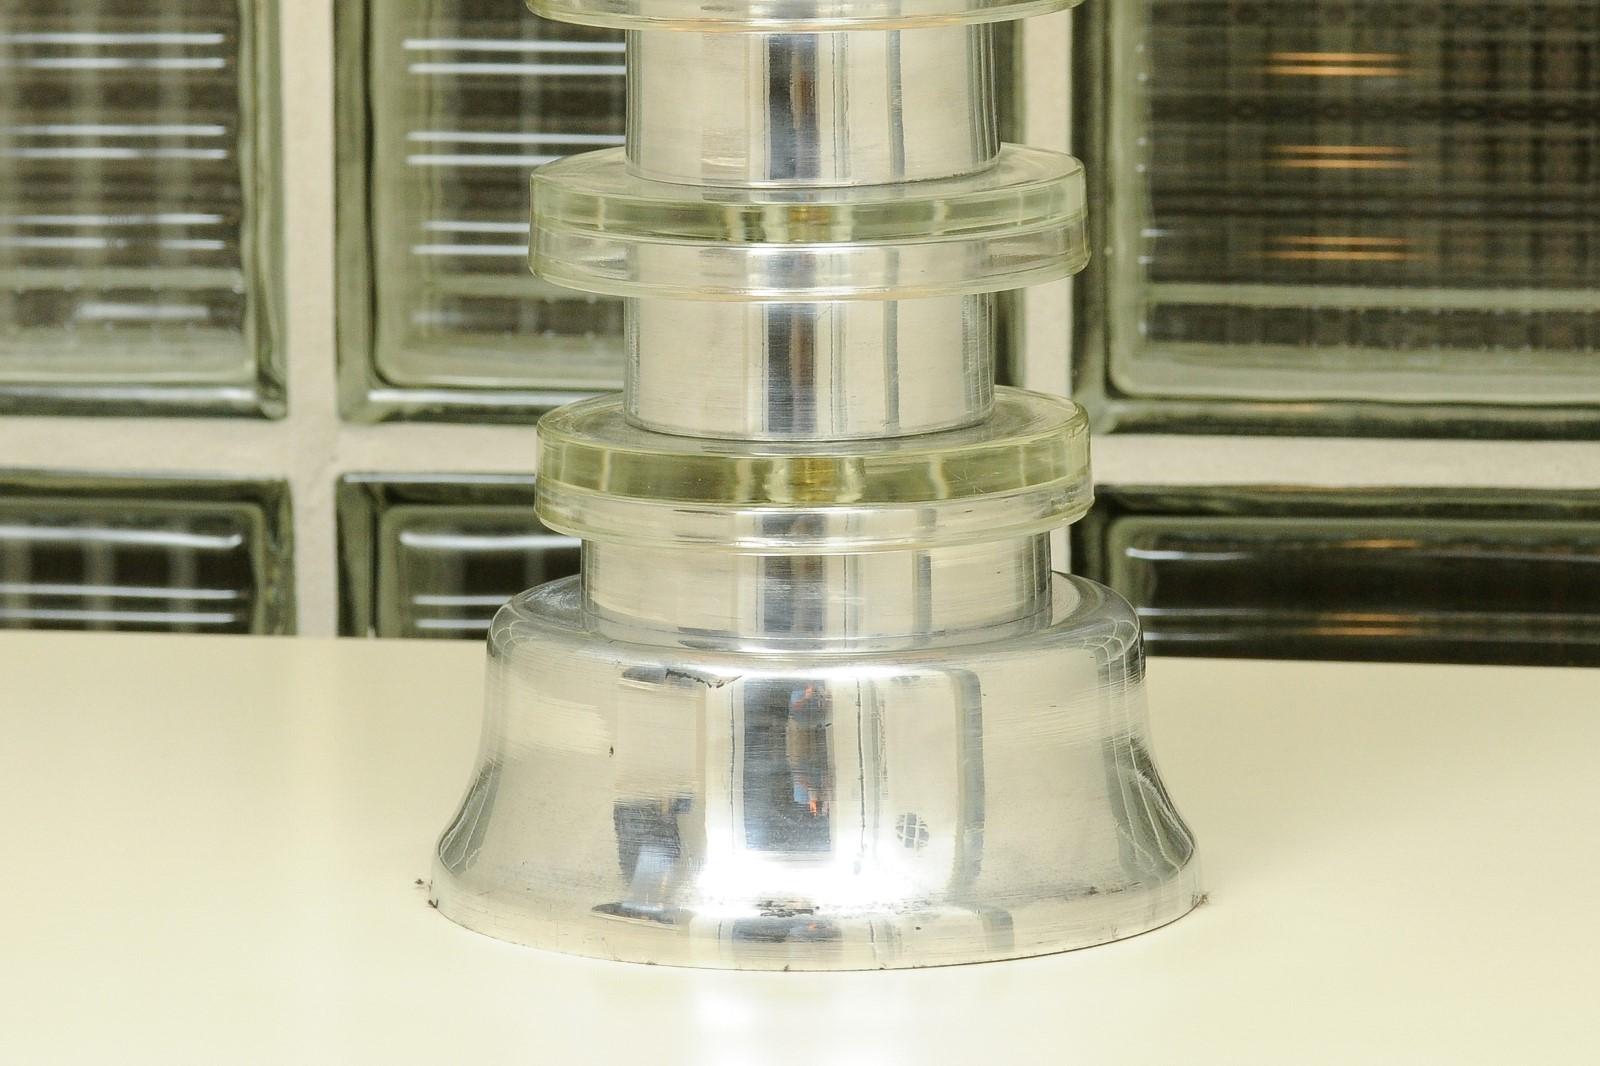 Glorious Restored Pair of Art Deco Lamps in Spun Aluminum and Glass, circa 1940 For Sale 1